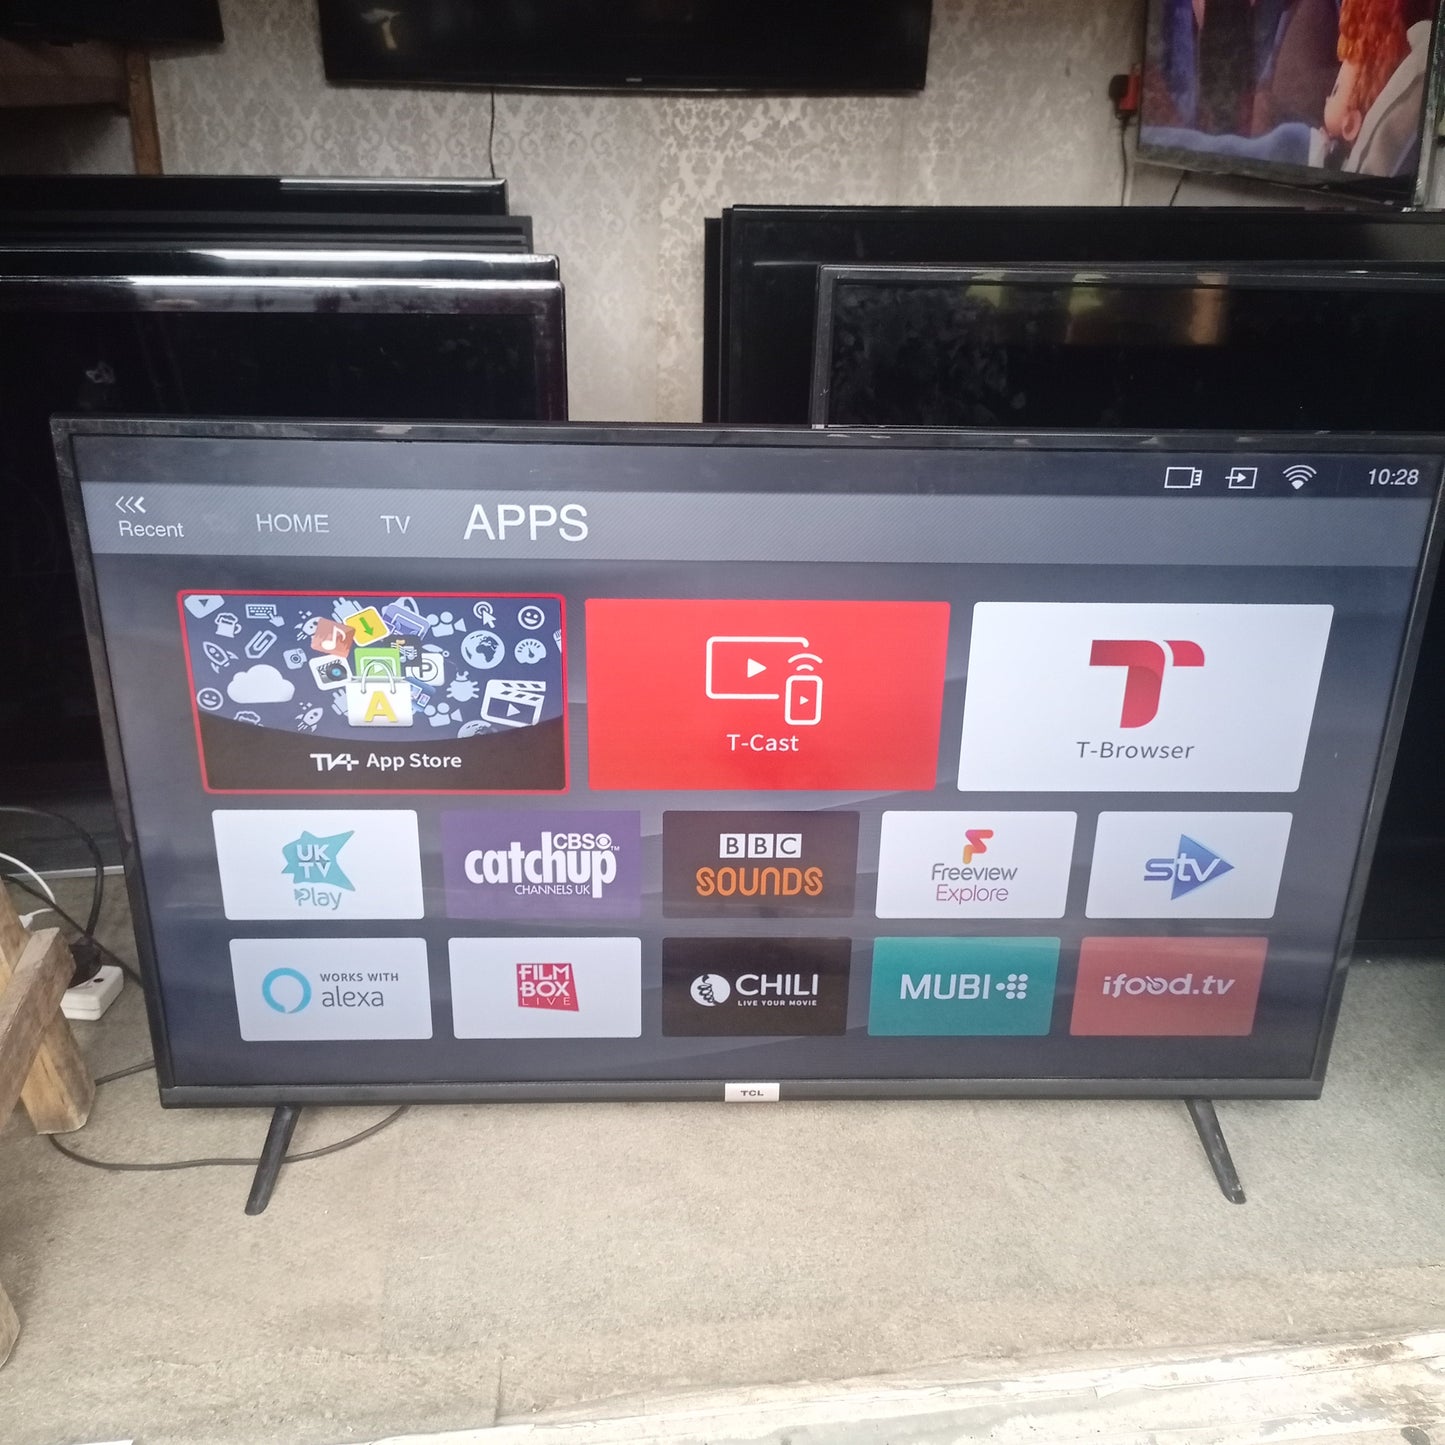 TCL 43 inch 43DP628 Smart 4K UHD LED TV (WiFi, Netflix, YouTube) - Front View